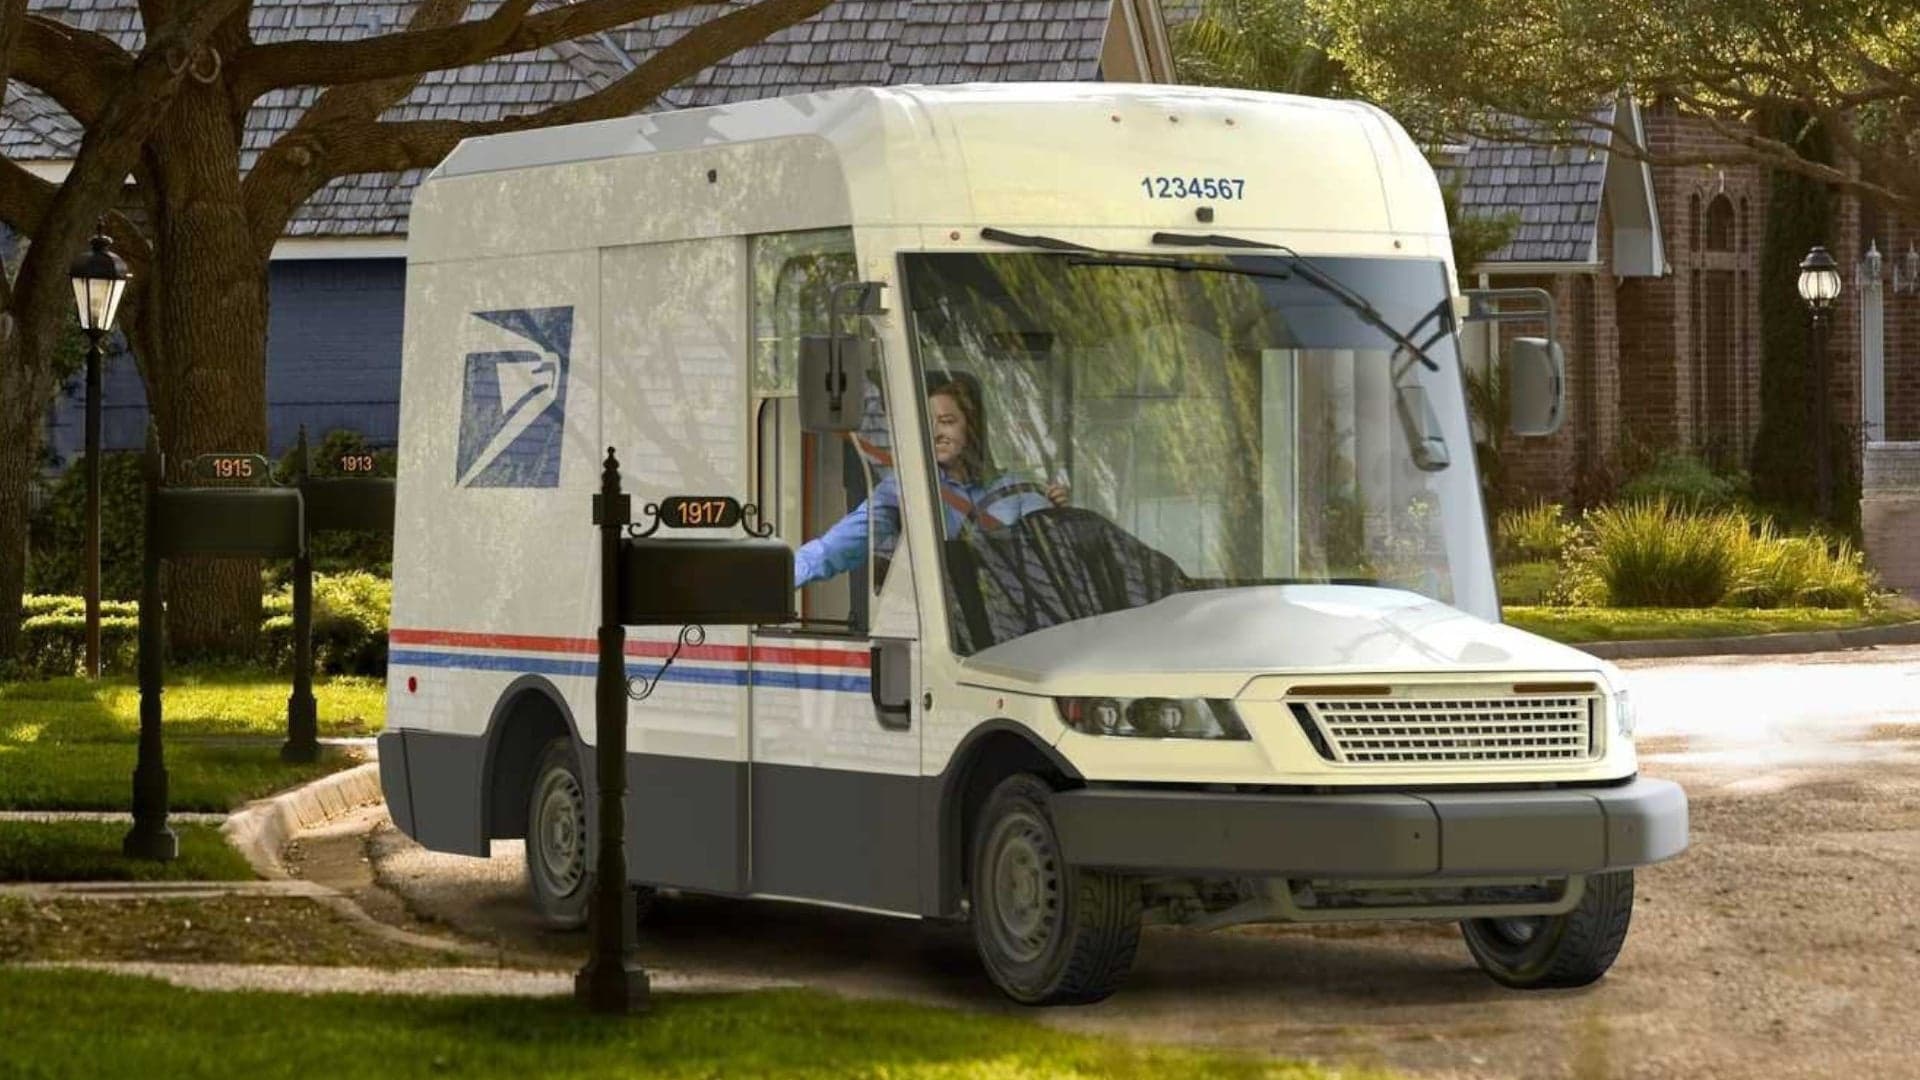 USPS Pushes Ahead With Gas Mail Truck Purchase, Defying White House